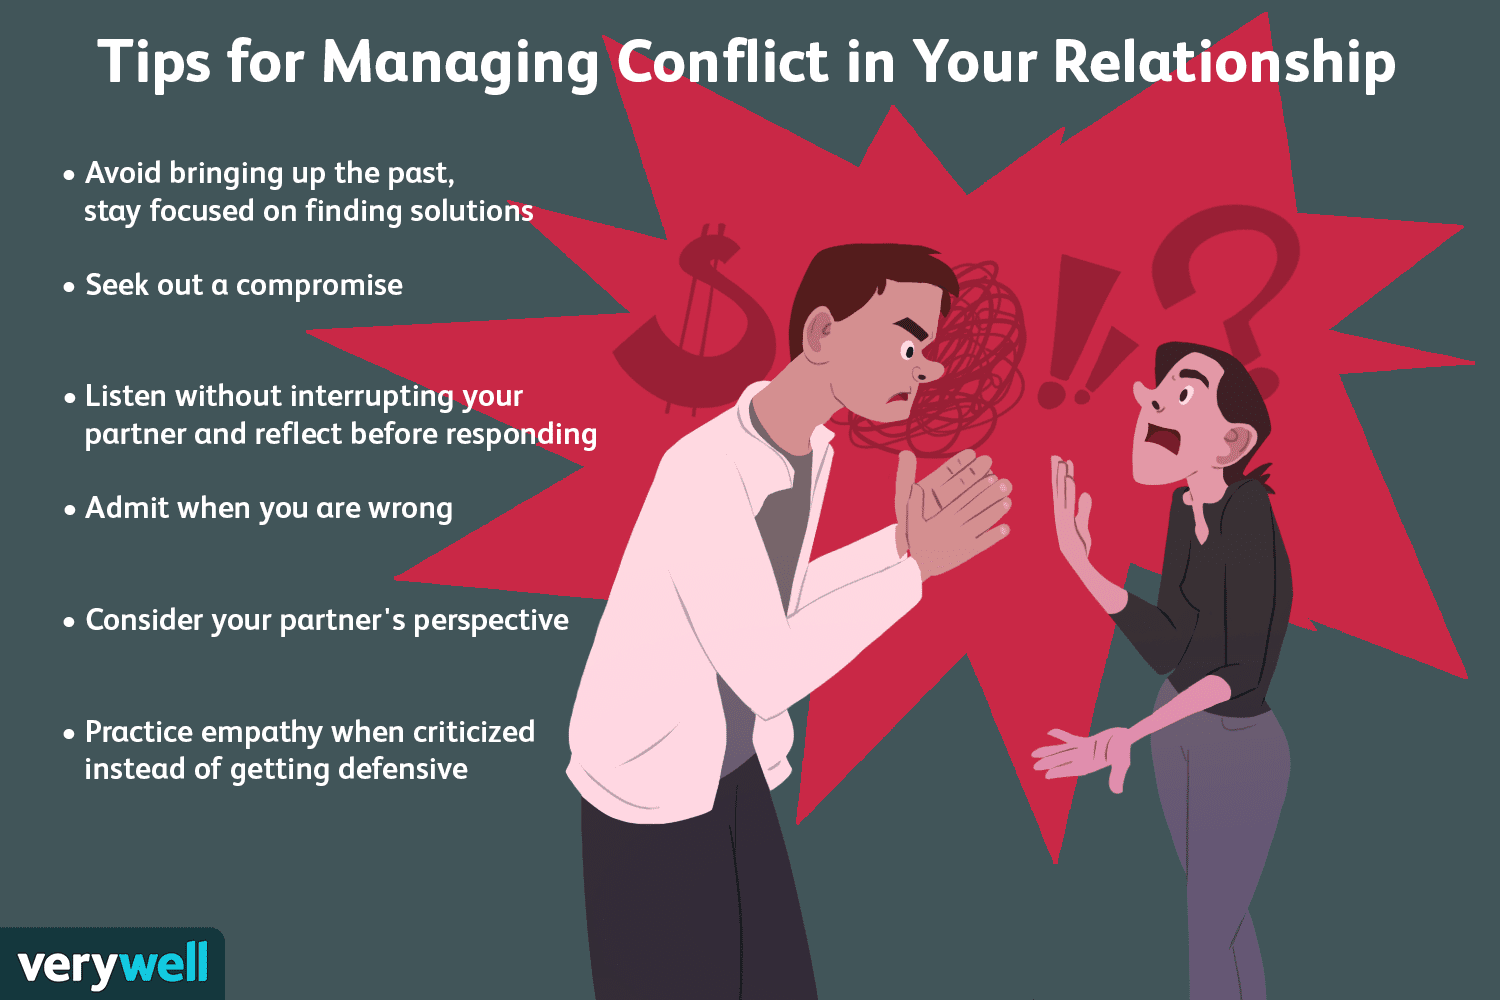 managing-conflict-in-relationships-communication-tips-3144967_final1-37543262e0a747c1b1145c6a4f88578b